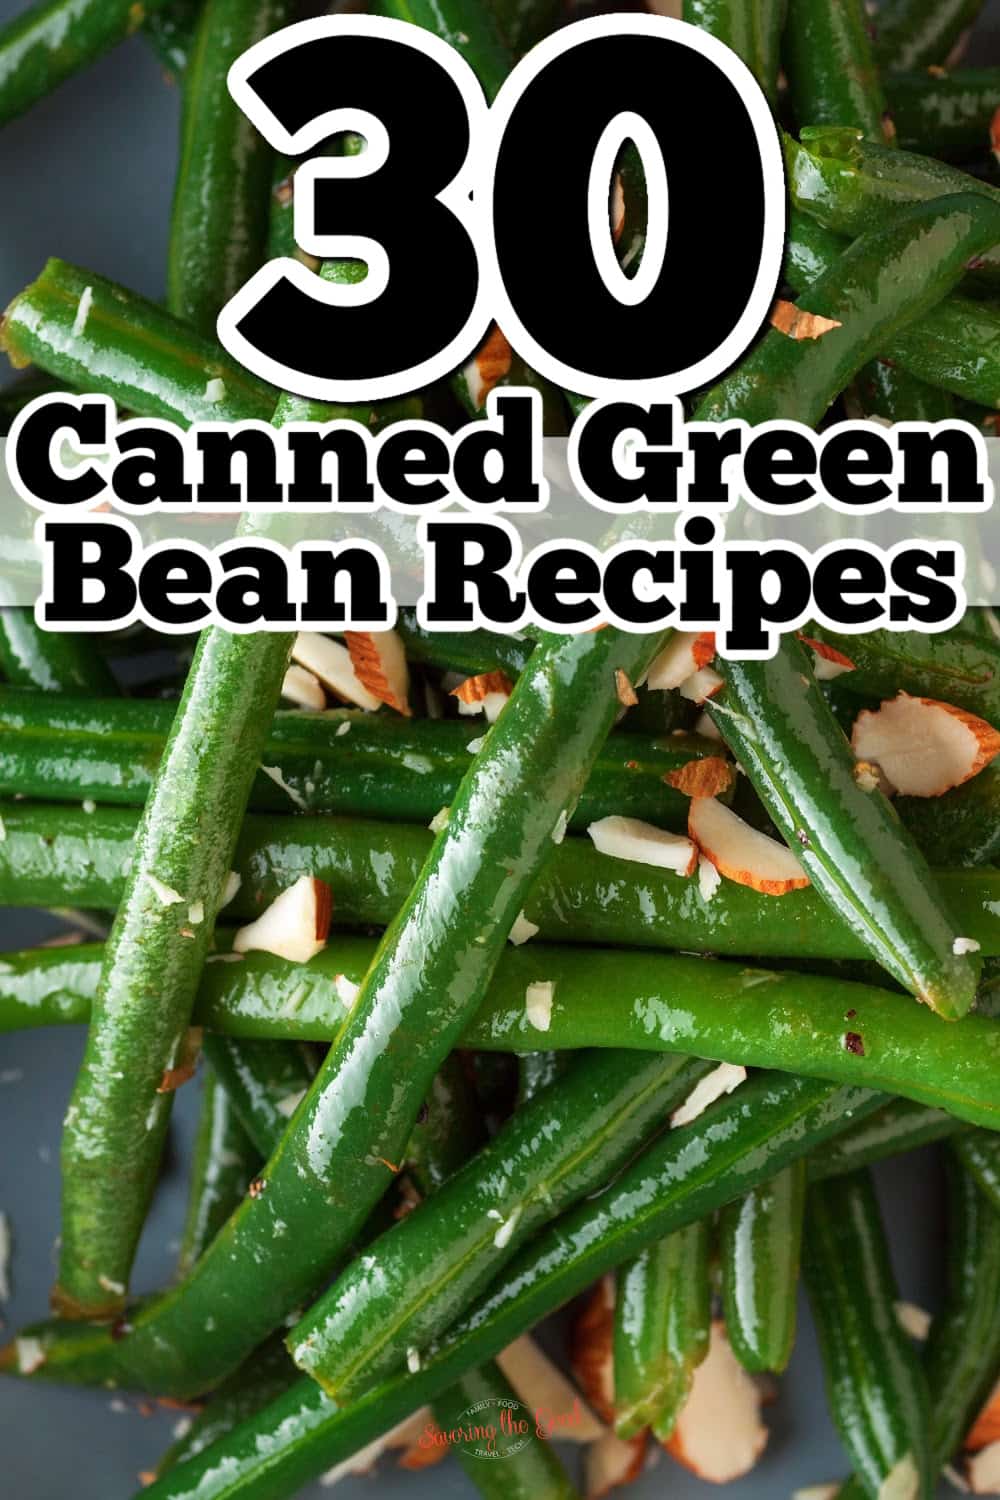 20 canned green bean recipes facebook image with text overlay.